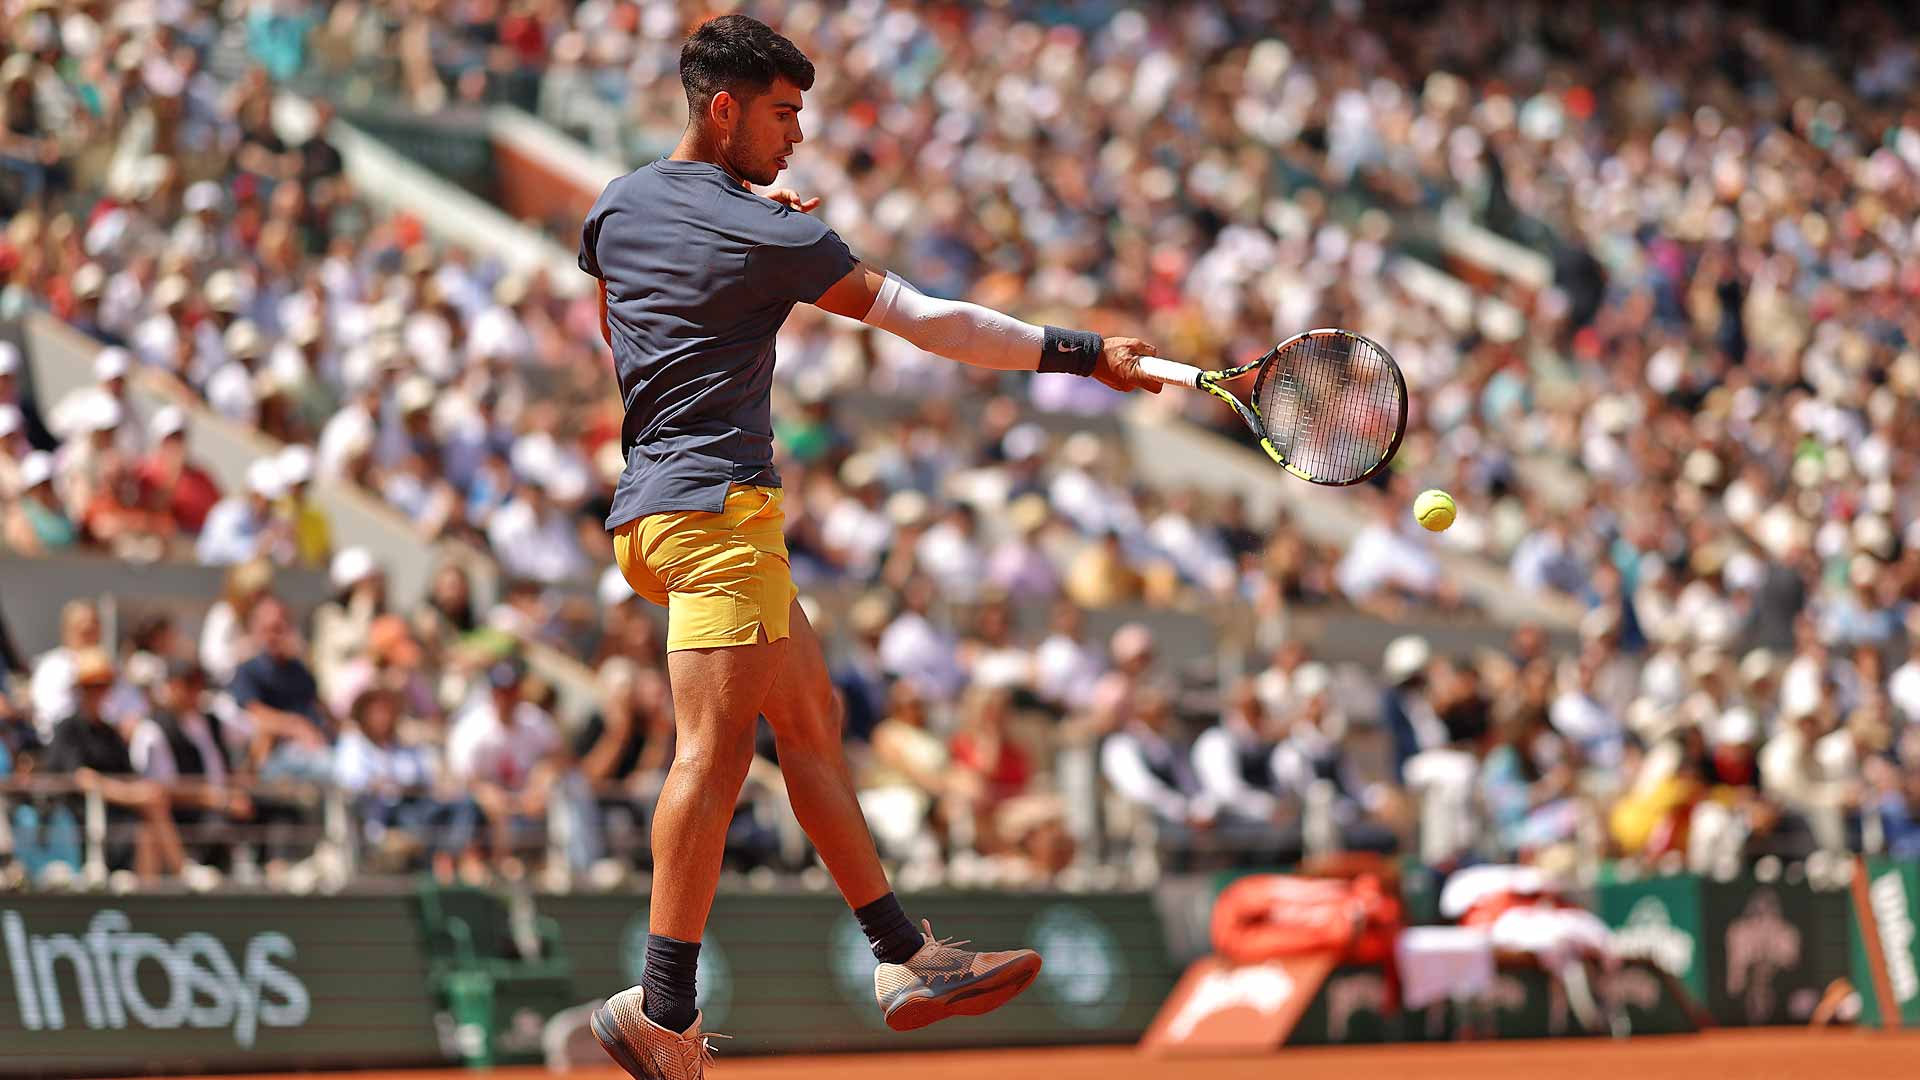 Carlos Alcaraz in action against J.J. Wolf on Sunday at Roland Garros.